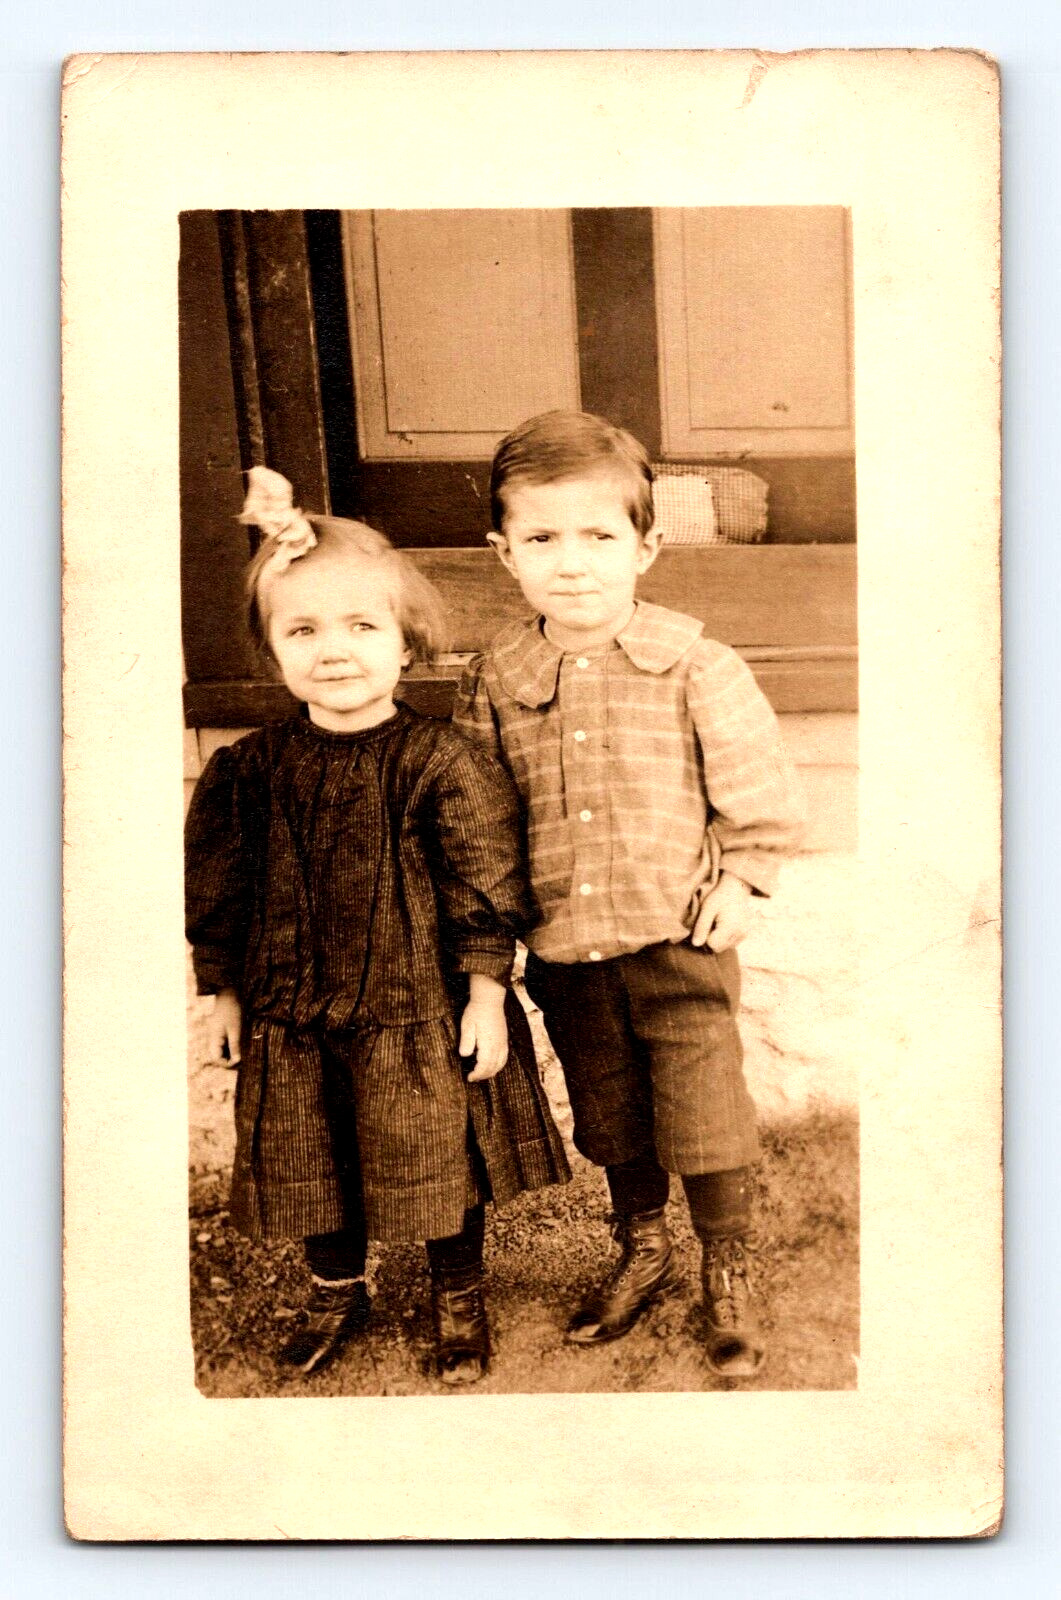 Vintage Sepia Photo Post Card Small Boy and Girl 5.5x3.5 inches 